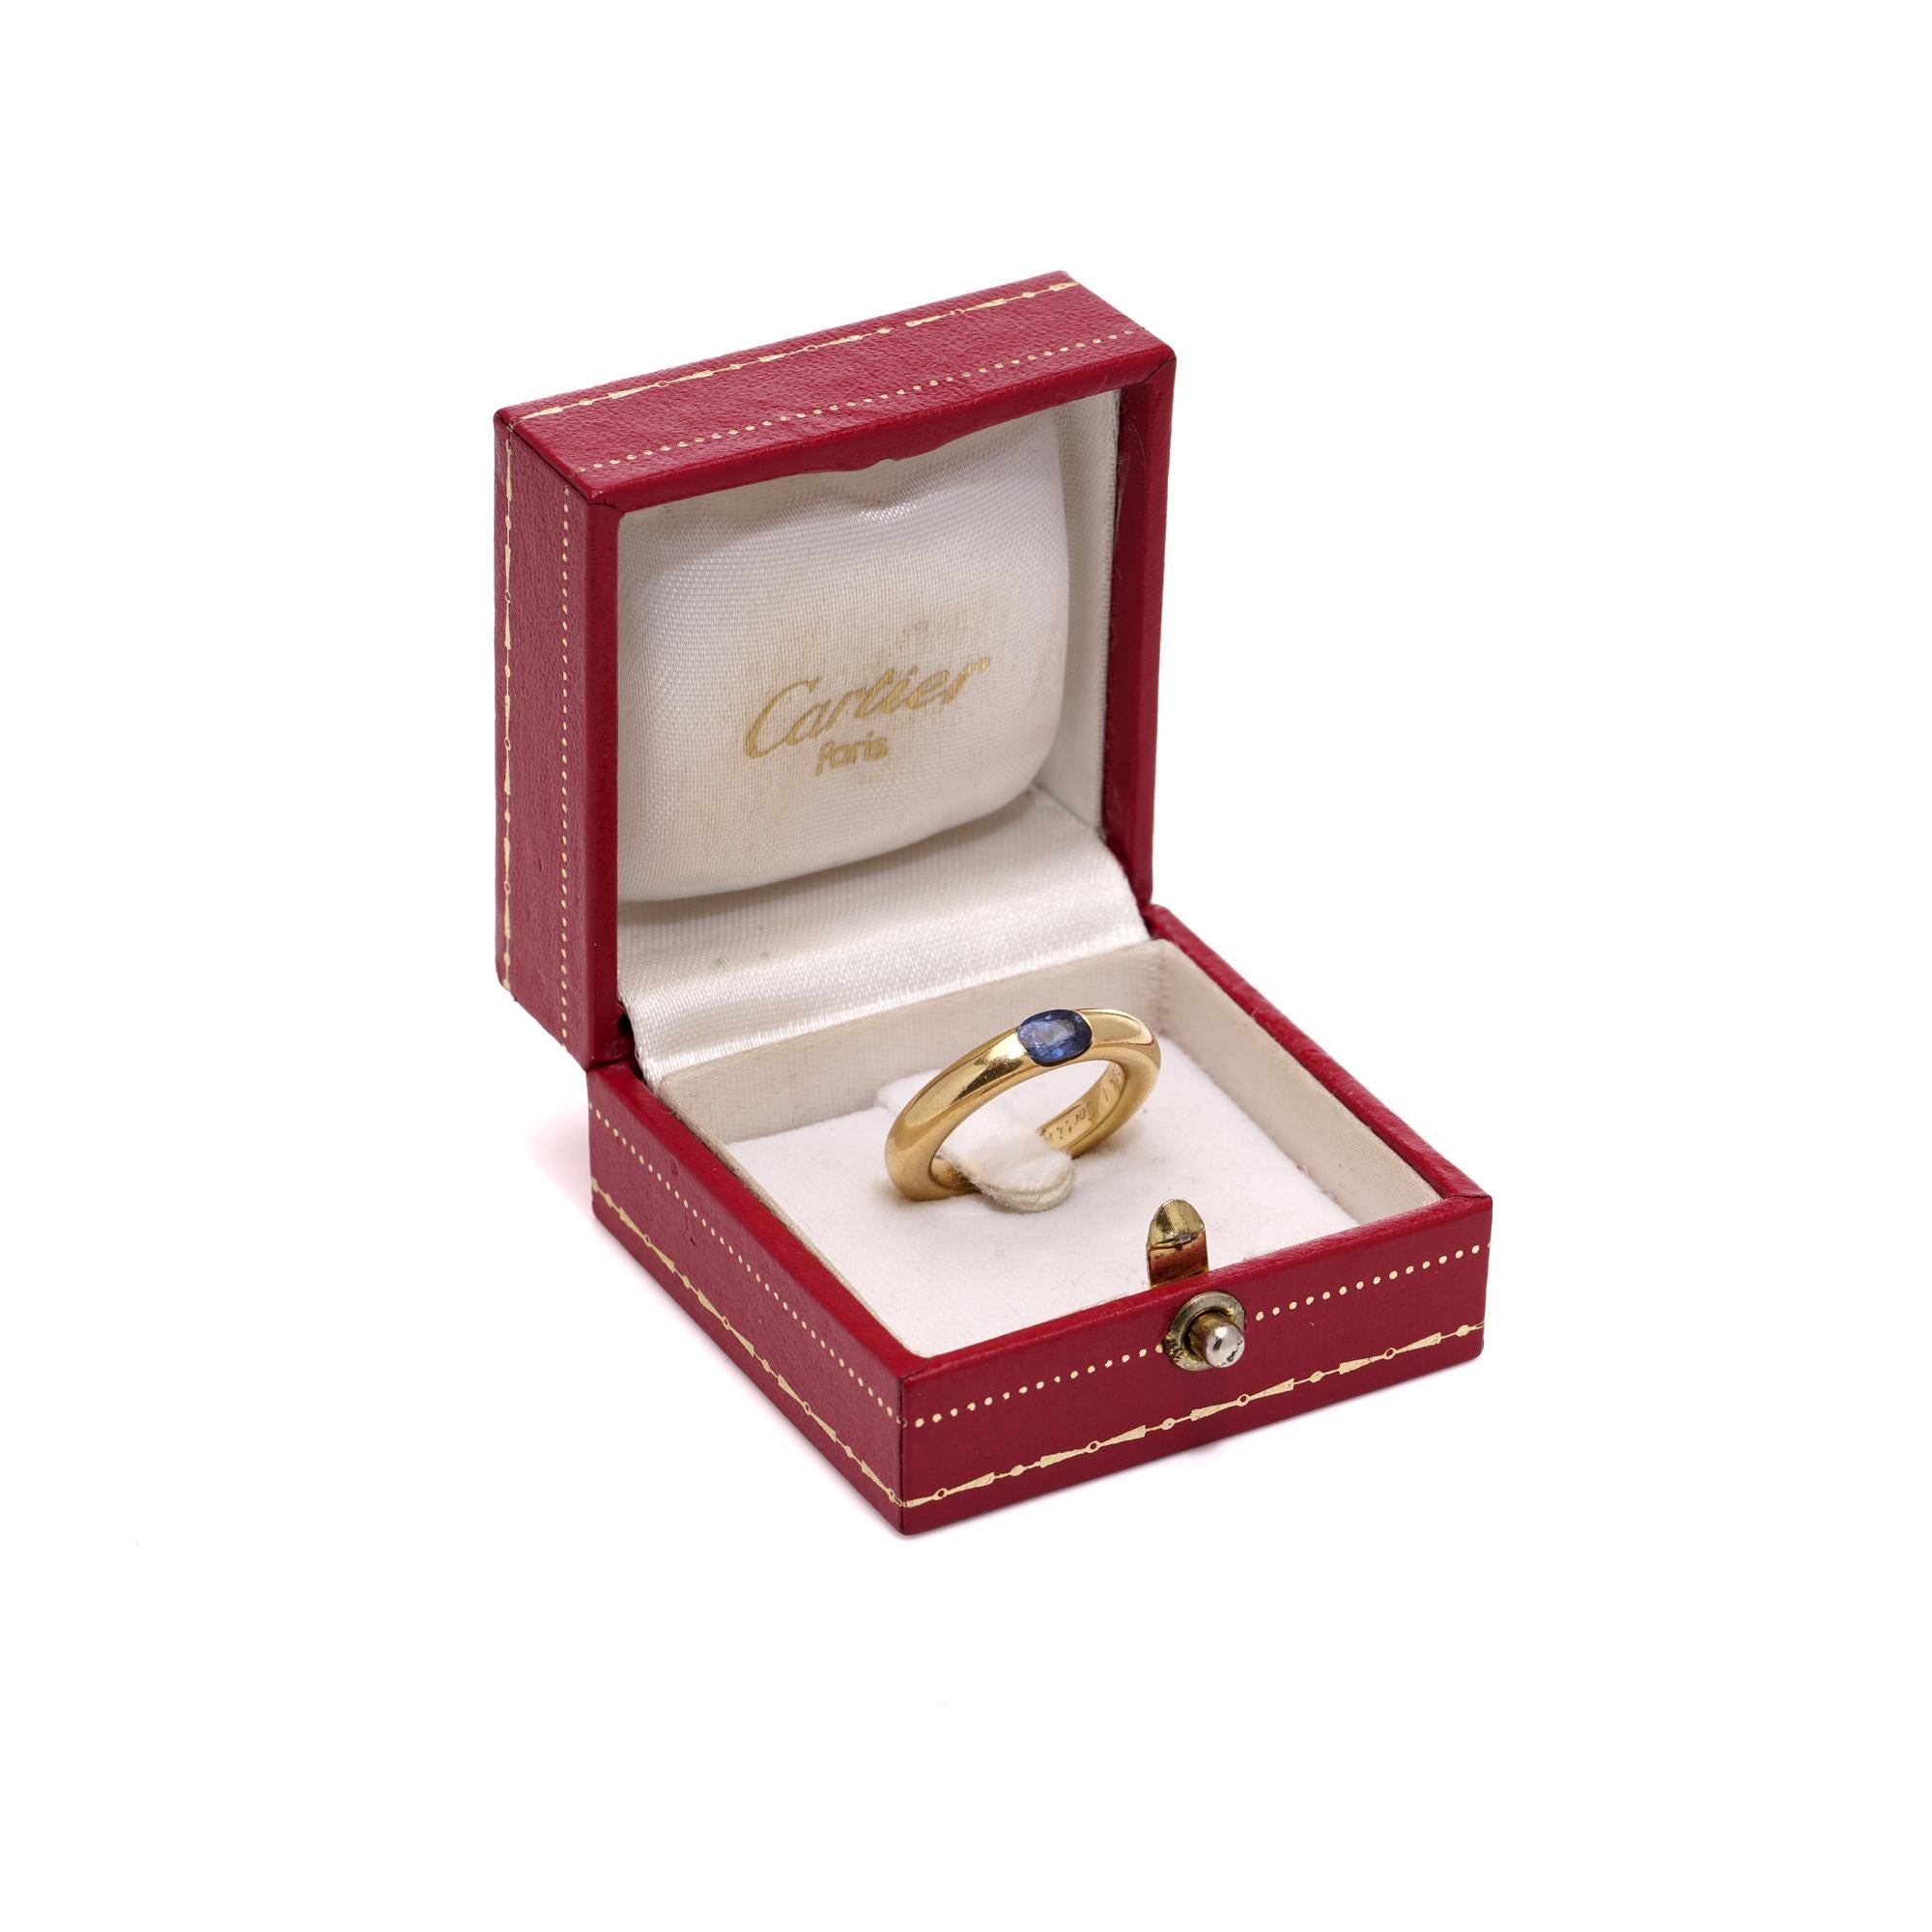 Cartier Ellipse Collection vintage 18kt. yellow gold plain band ring set in demi flush setting, set with an oval 0.40ct. faceted sapphire. 
Designer: Cartier
Made in France, 1992
Fully hallmarked.

Dimensions -
Finger Size (UK) = L US) = 6 (EU) =